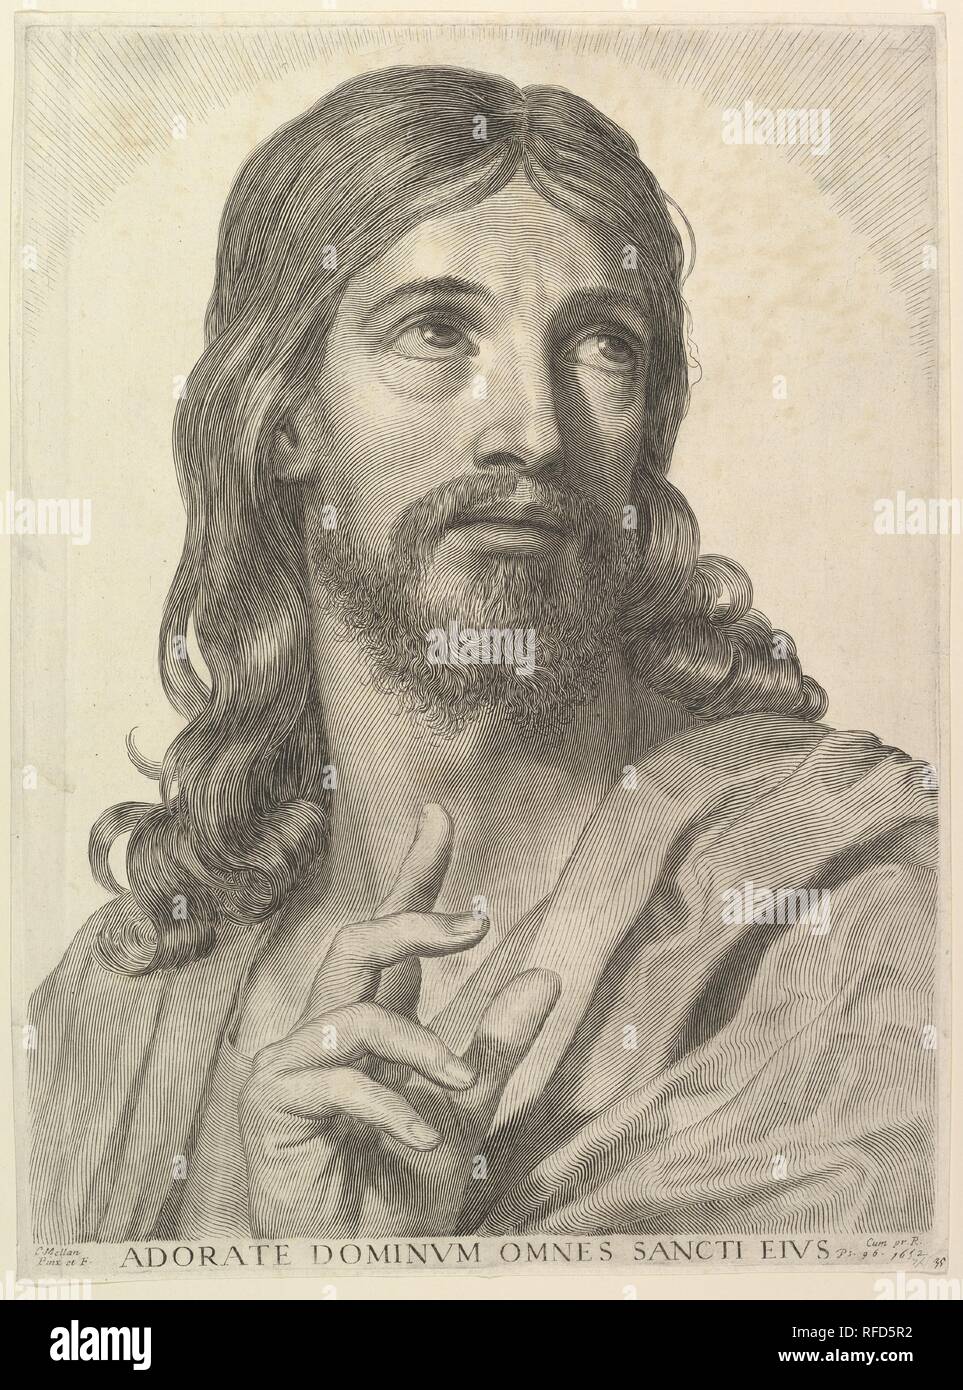 Bust of the Adult Christ. Artist: Claude Mellan (French, Abbeville 1598-1688 Paris). Dimensions: sheet: 17 7/16 x 12 13/16 in. (44.3 x 32.5 cm)  plate: 17 3/16 x 12 1/2 in. (43.6 x 31.8 cm). Date: 1652. Museum: Metropolitan Museum of Art, New York, USA. Stock Photo